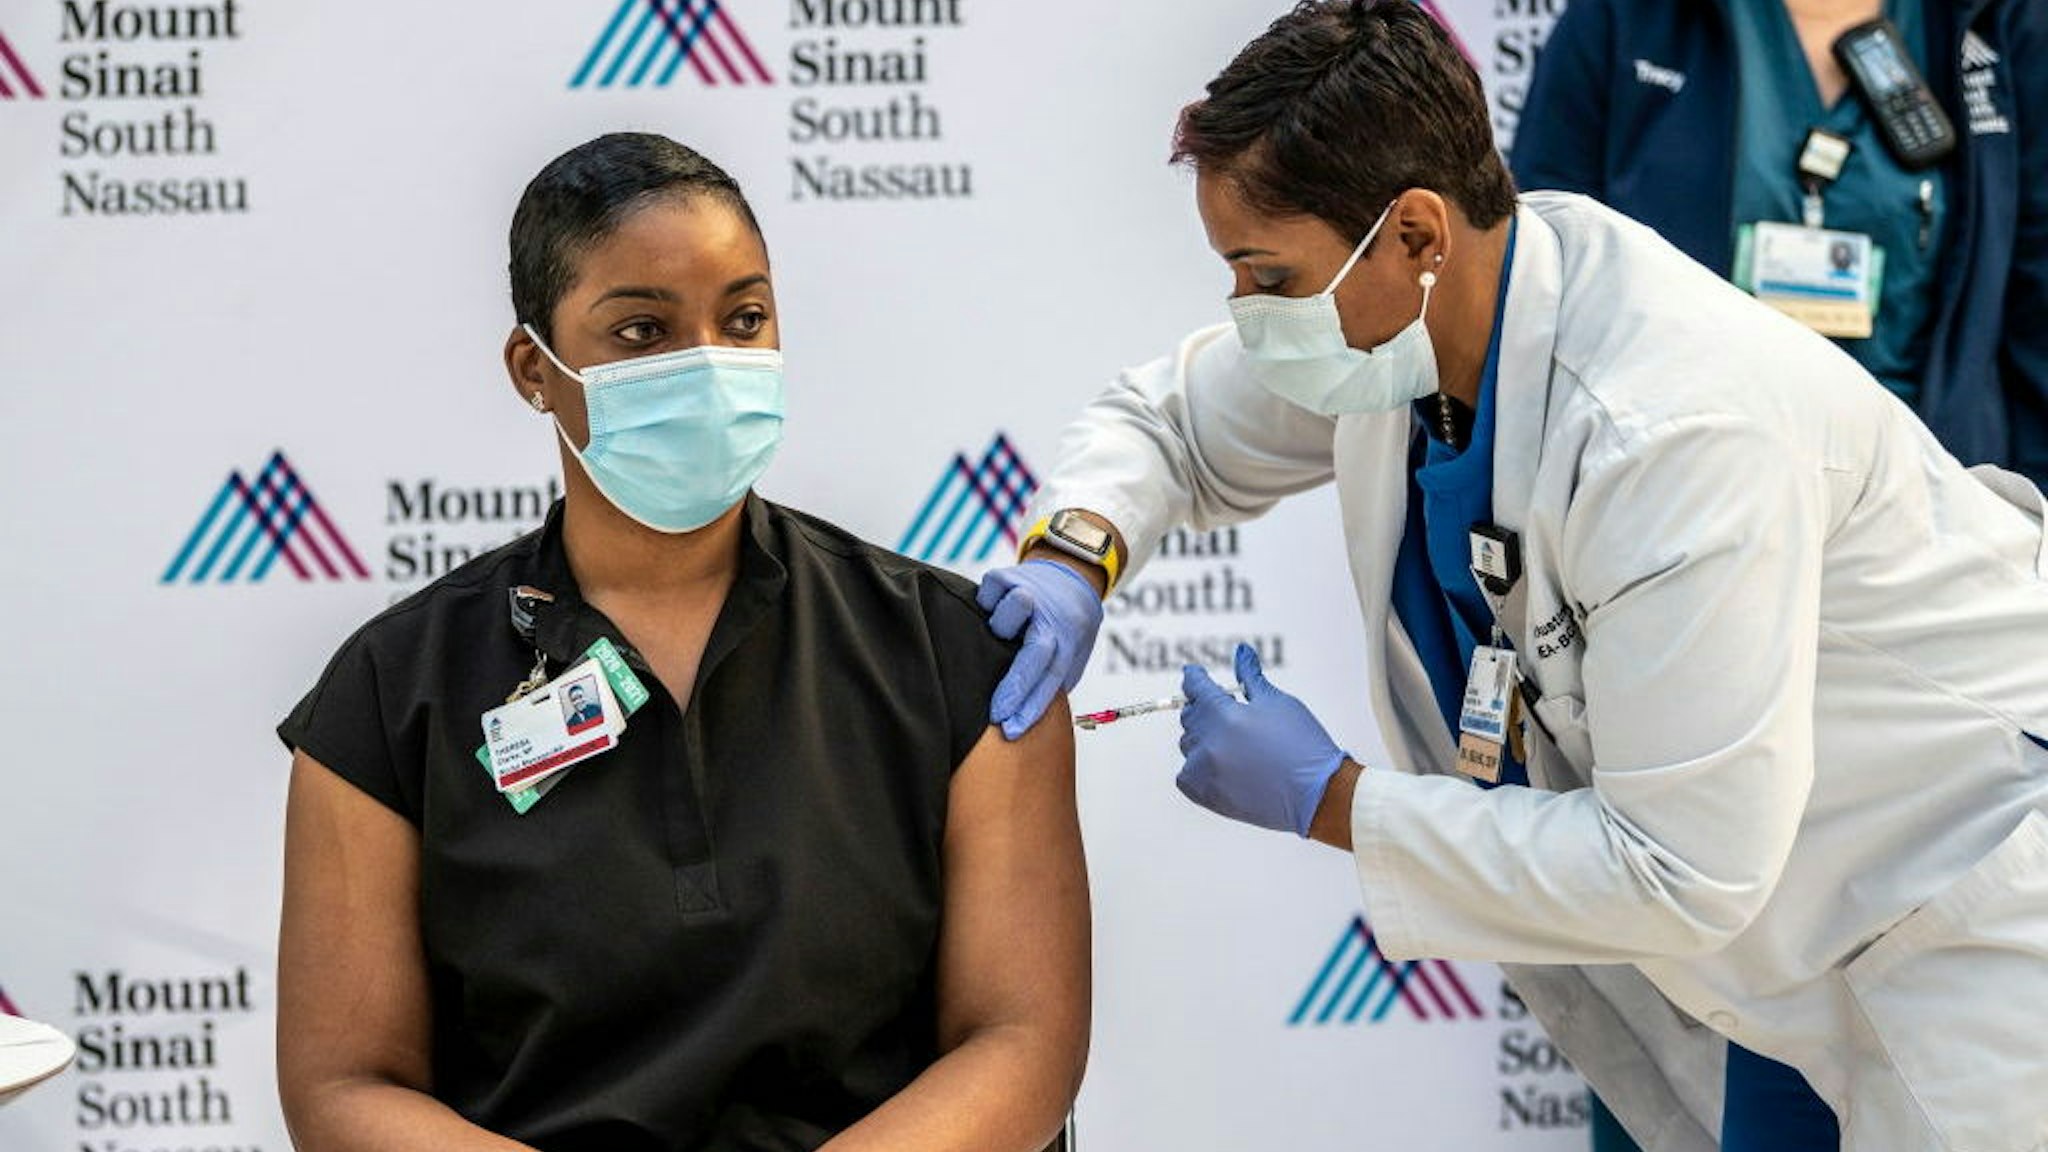 Oceanside, N.Y.: Theresa Clarke, Nurse Manager at Mount Sinai South Nassau hospital is the first staff member to get the COVID-19 vaccination on Dec. 15, 2020 in Oceanside, New York. (Photo by Alejandra Villa Loraca/Newsday via Getty Images)